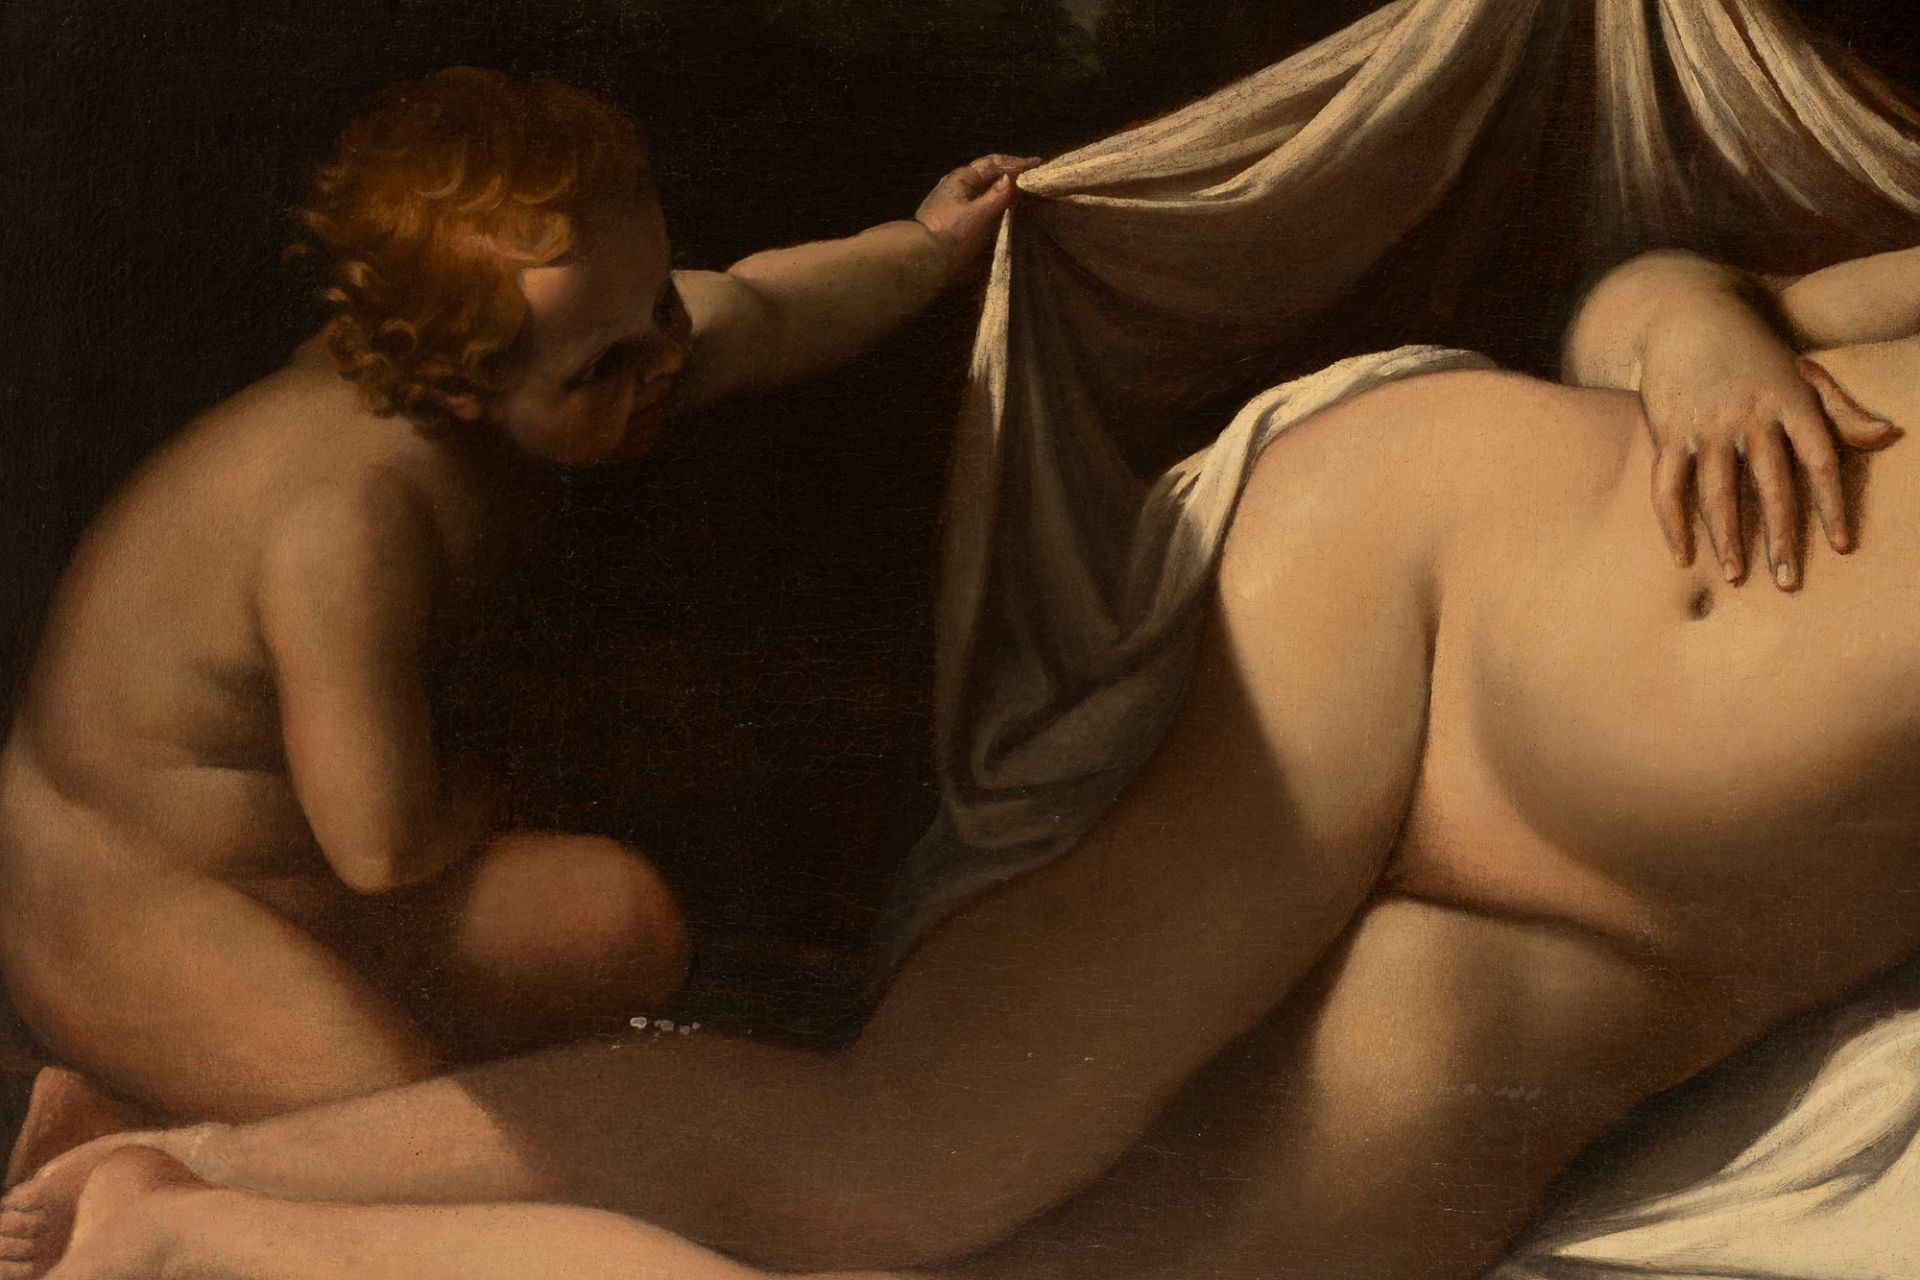 Attributed to Giovanni Lanfranco (Parma, 1582 – Rome, 1647) - Sleeping Venus with two cupids - Image 4 of 5